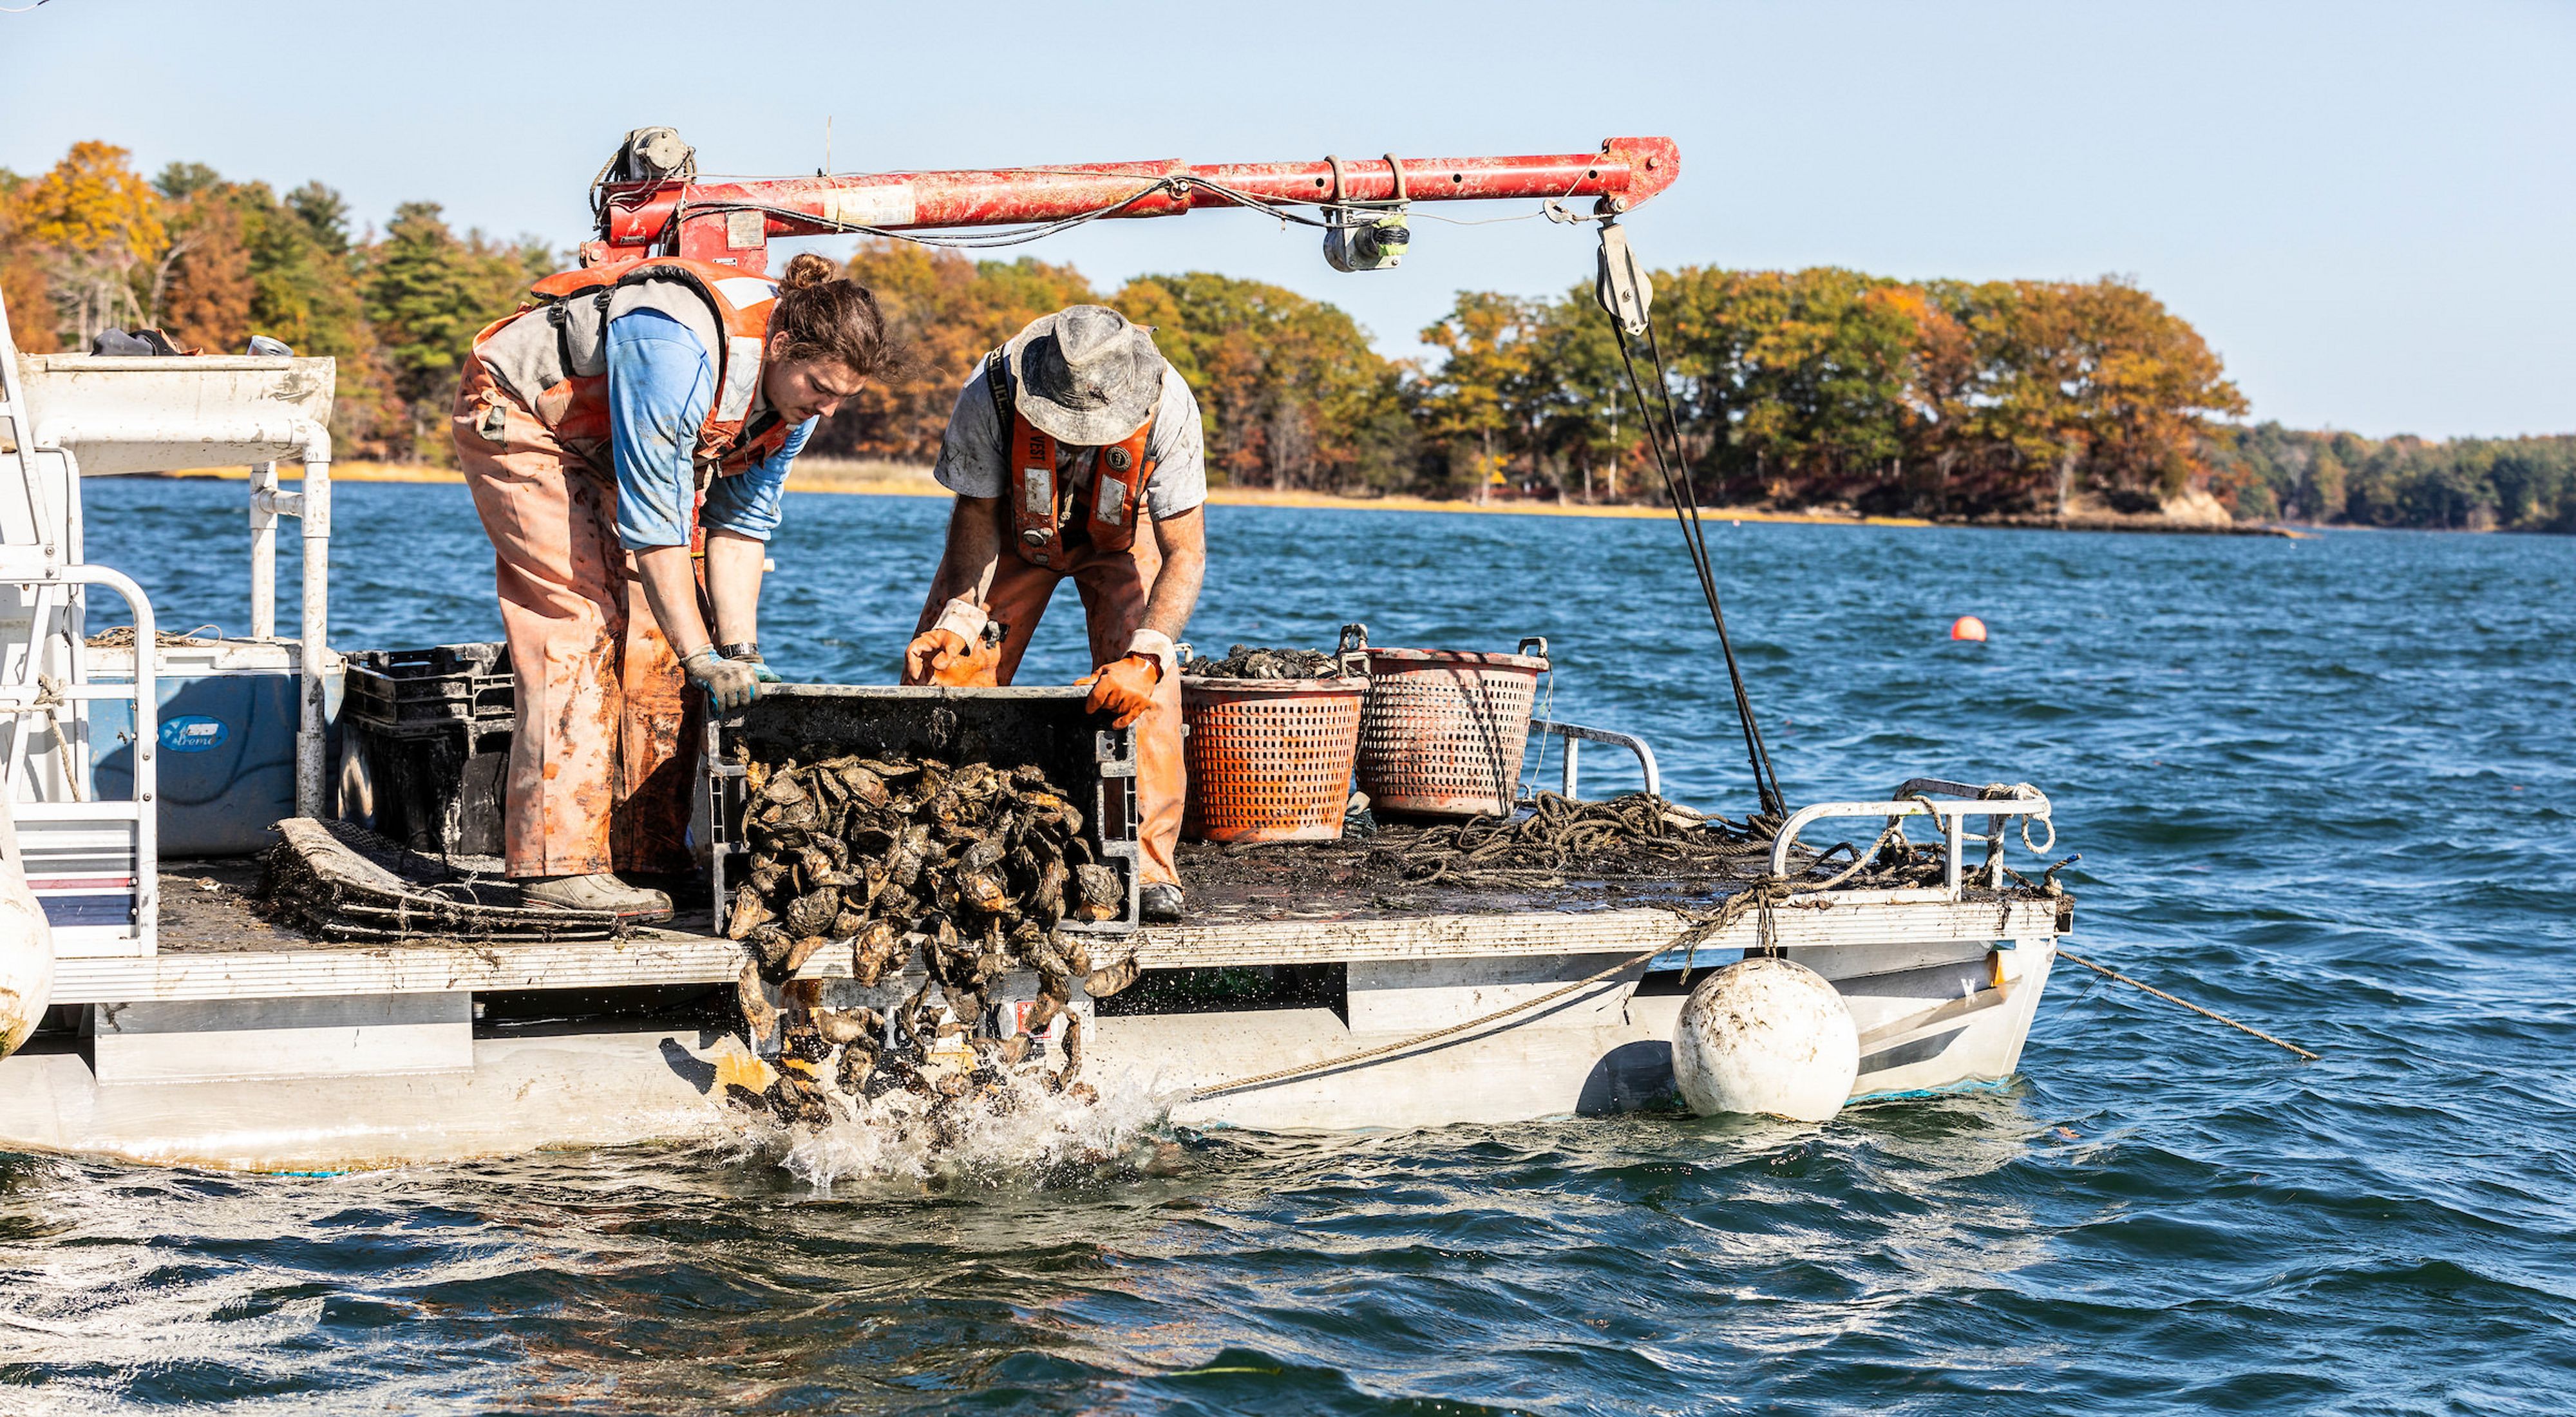 Brian Gennaco (right) of the Virgin Oyster Company and an employee add oysters to a restoration reef as part of the Supporting Oyster Aquaculture and Restoration (SOAR) program. Great Bay in Durham, New Hampshire.